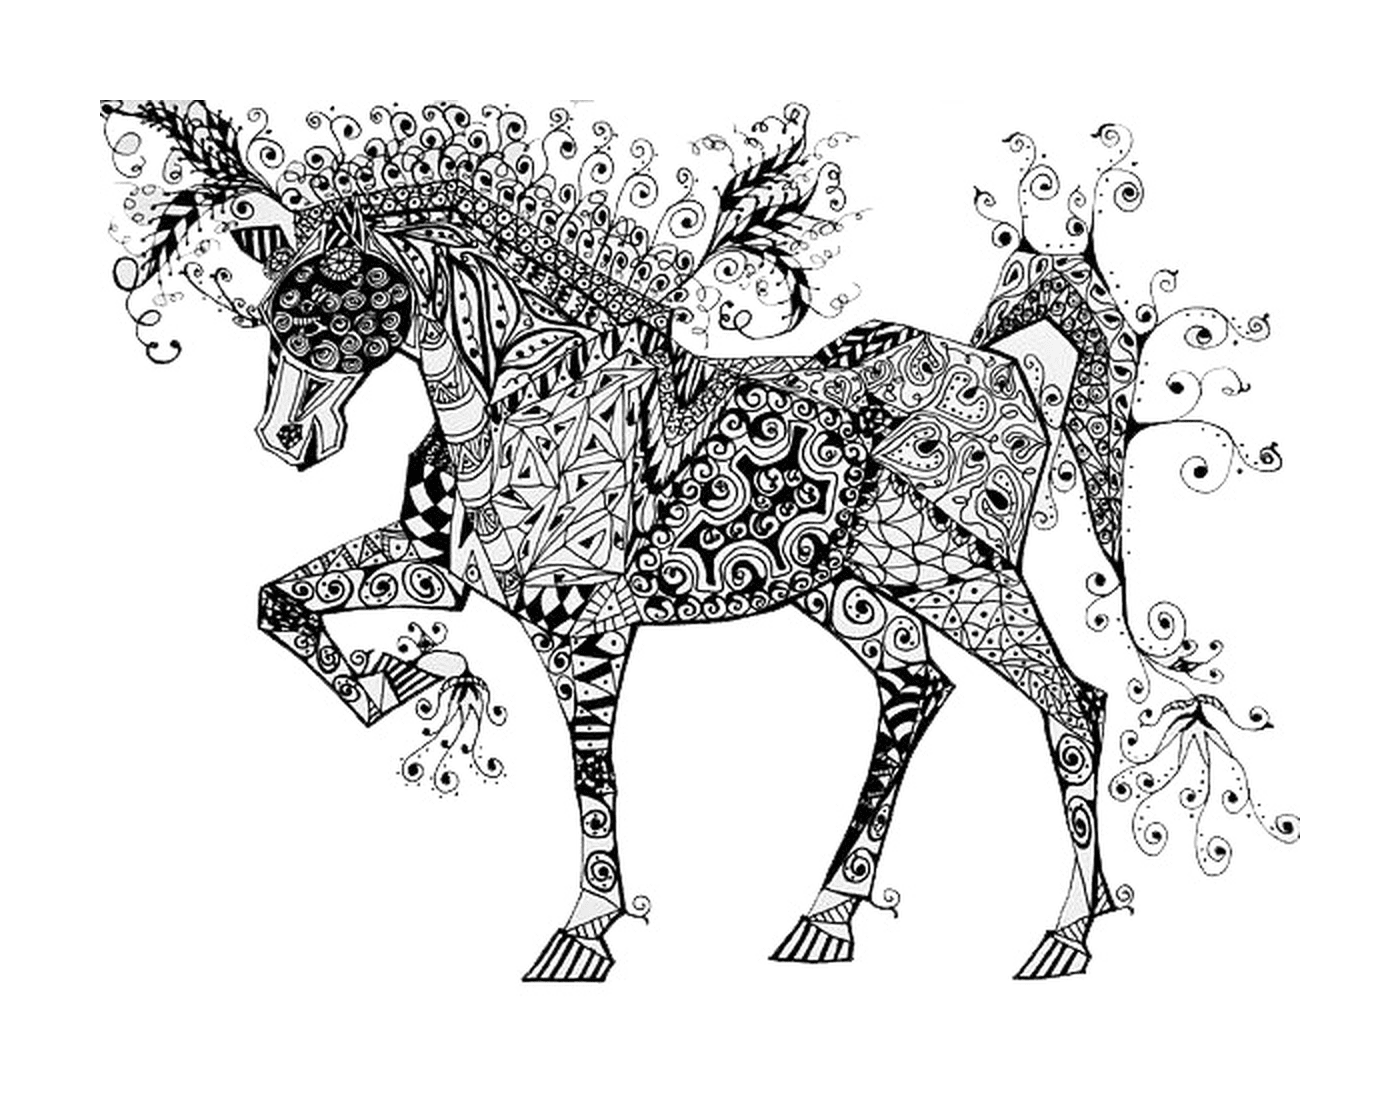  Circus horse with zentangle motifs 